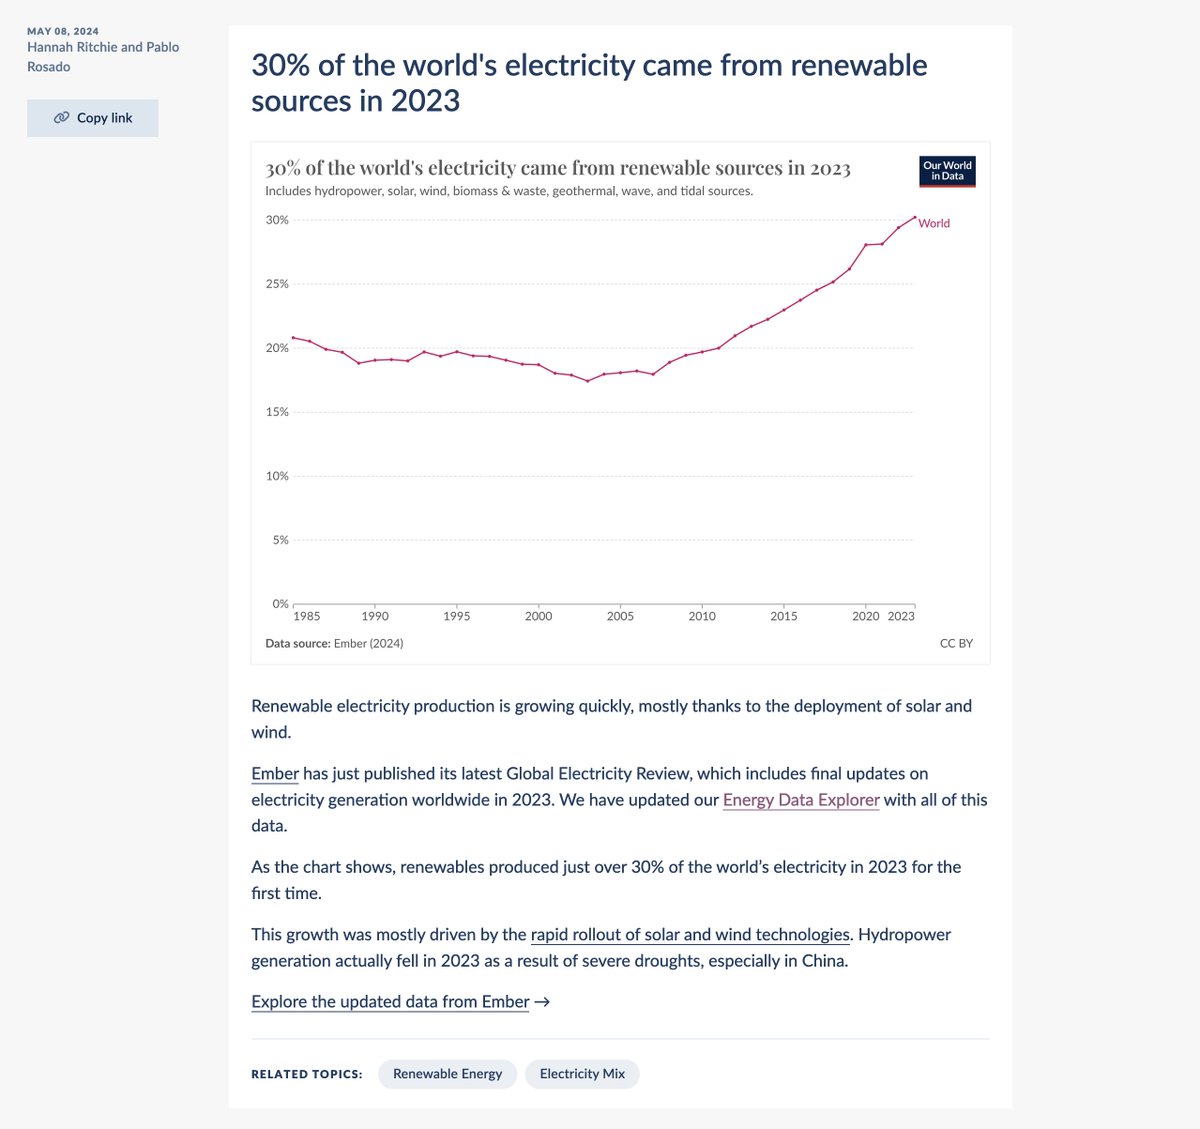 30% of the world's electricity came from renewable sources in 2023 Our Data Insight today, by my colleagues @_HannahRitchie and Pablo Rosado.